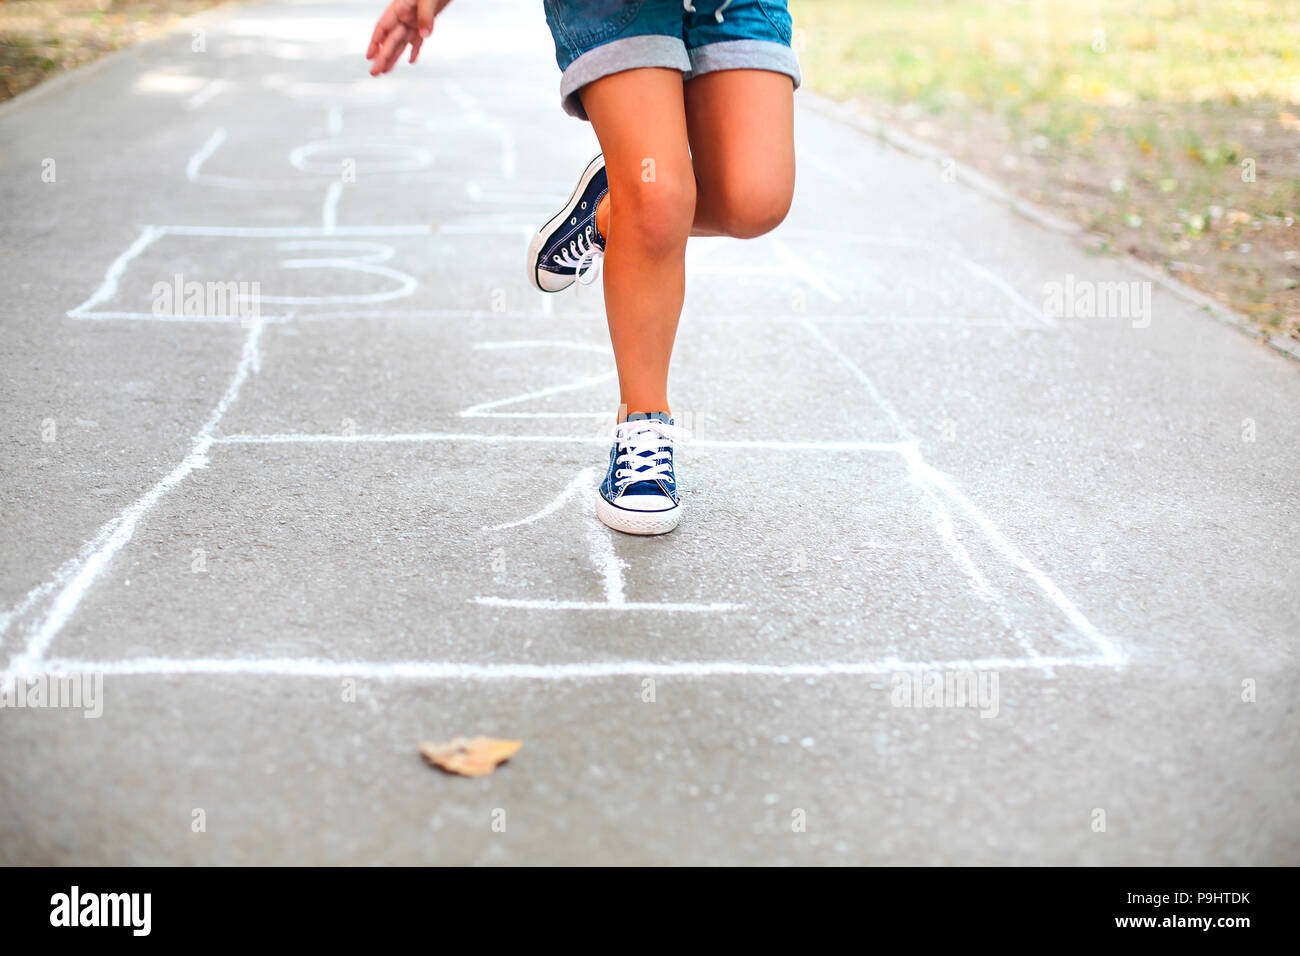 Kid playing hopscotch on playground outdoors, children outdoor activities Stock Photo